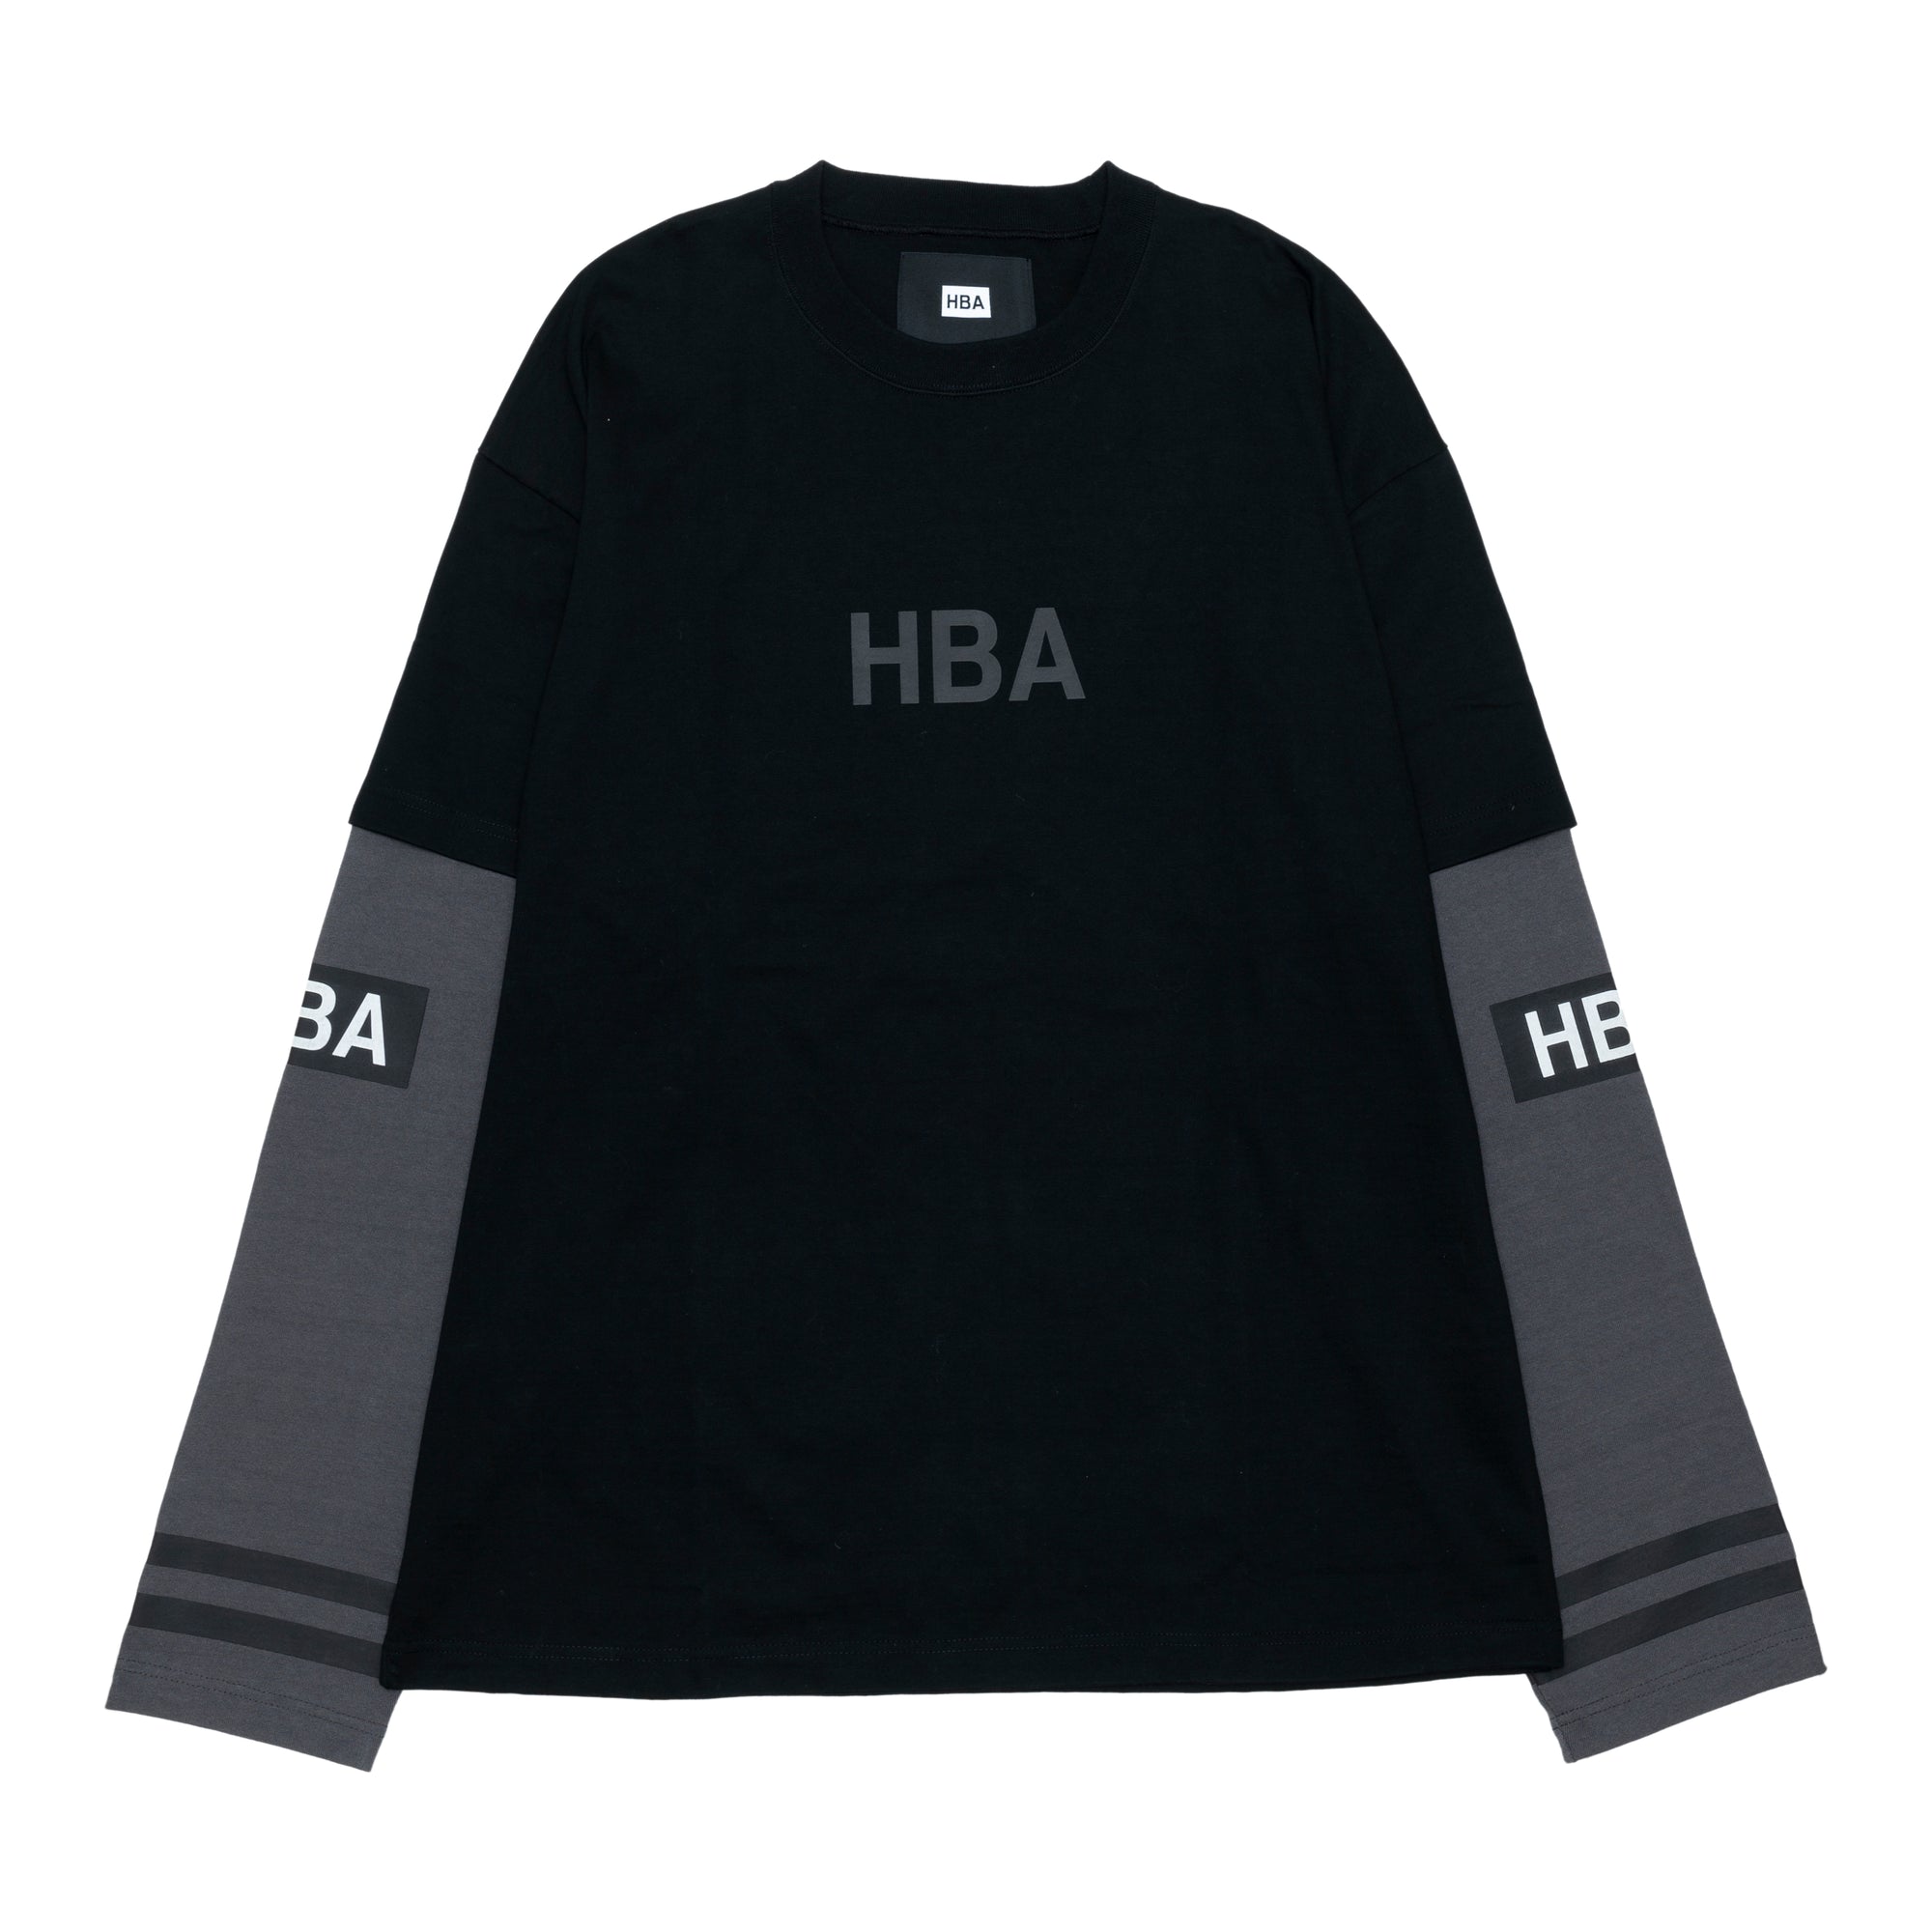 HOOD BY AIR - DSM SP LAYERED L/S HOCKEY TEE (TRUE/WASHED BLACK) view 1